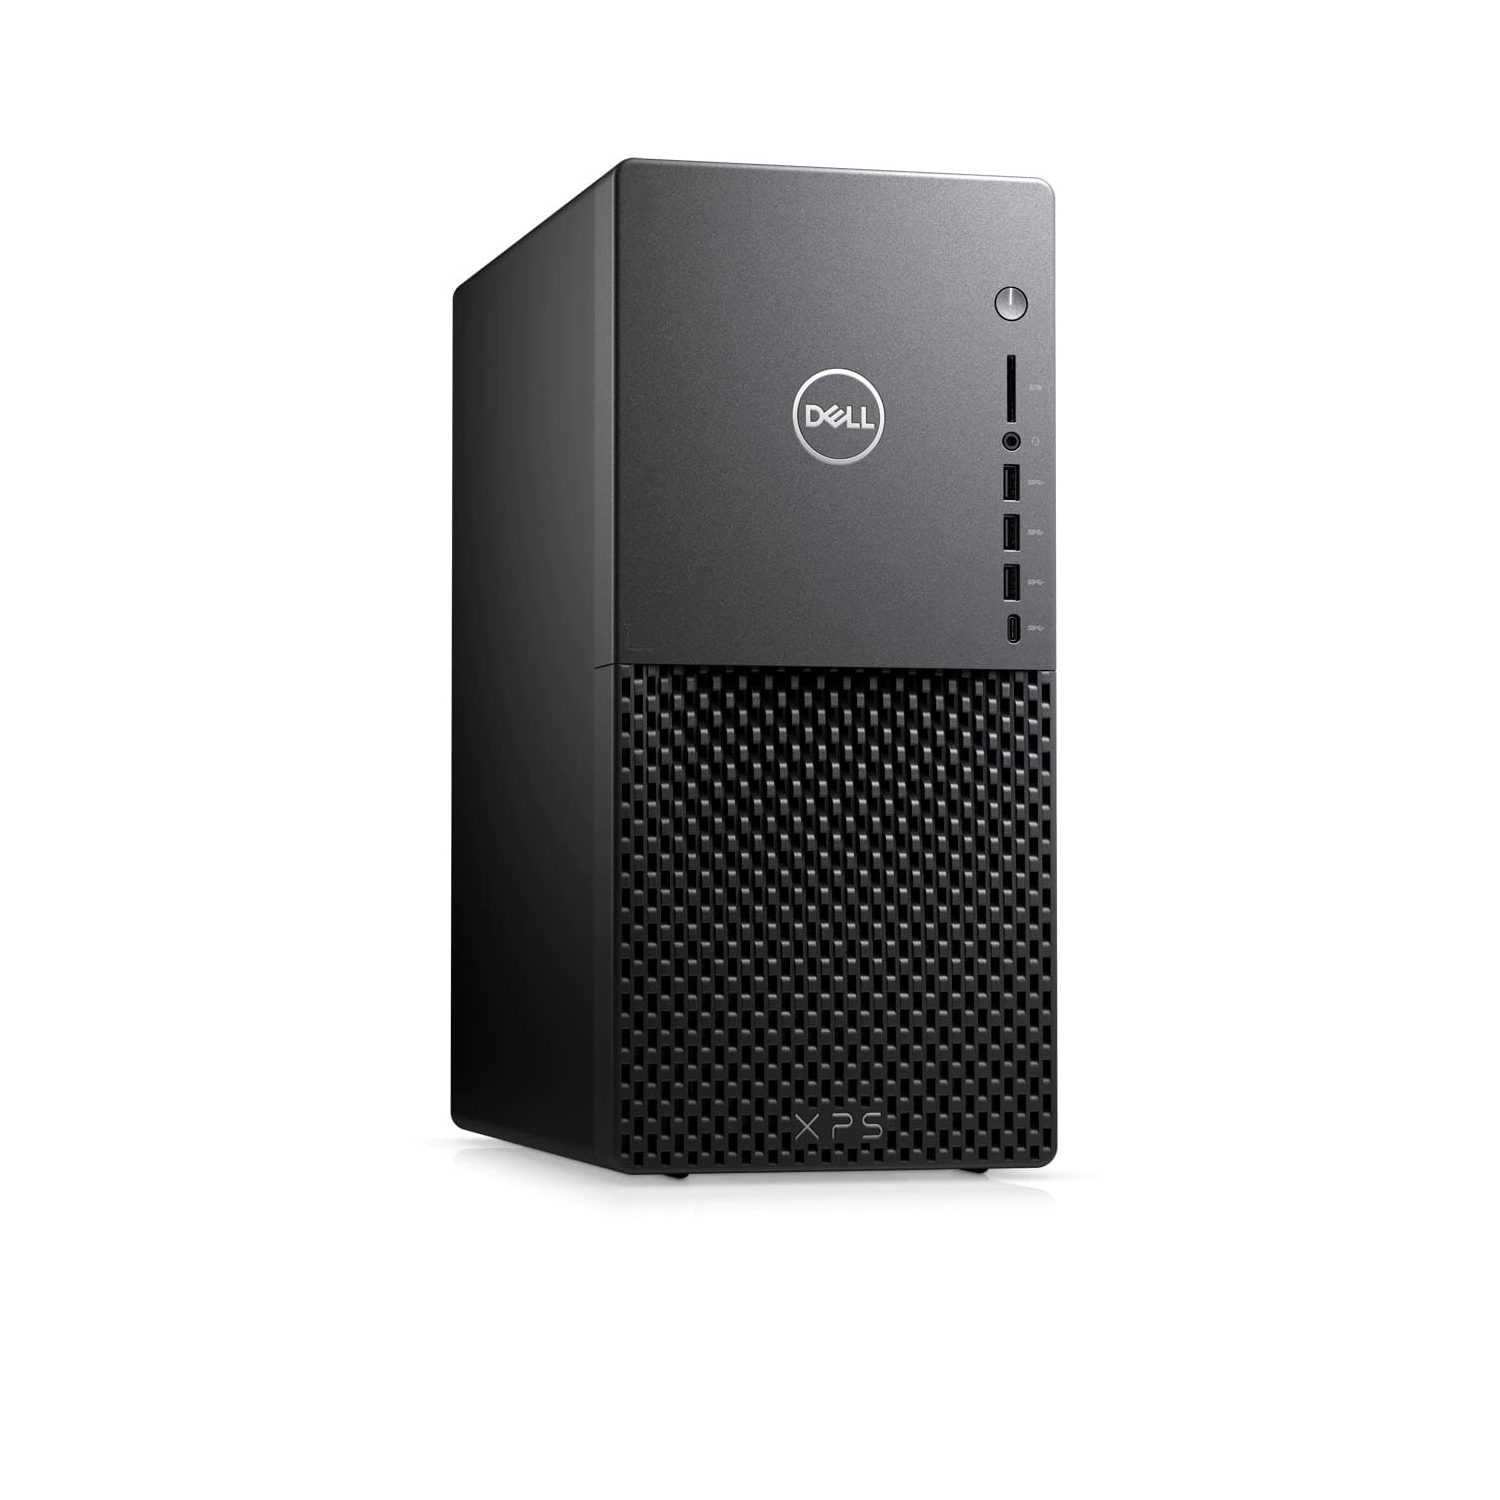 Refurbished (Excellent) - Dell XPS 8940 Desktop (2020) | Core i7 - 1TB SSD - 32GB RAM - RTX 2060 | 8 Cores @ 4.8 GHz - 10th Gen CPU Certified Refurbished